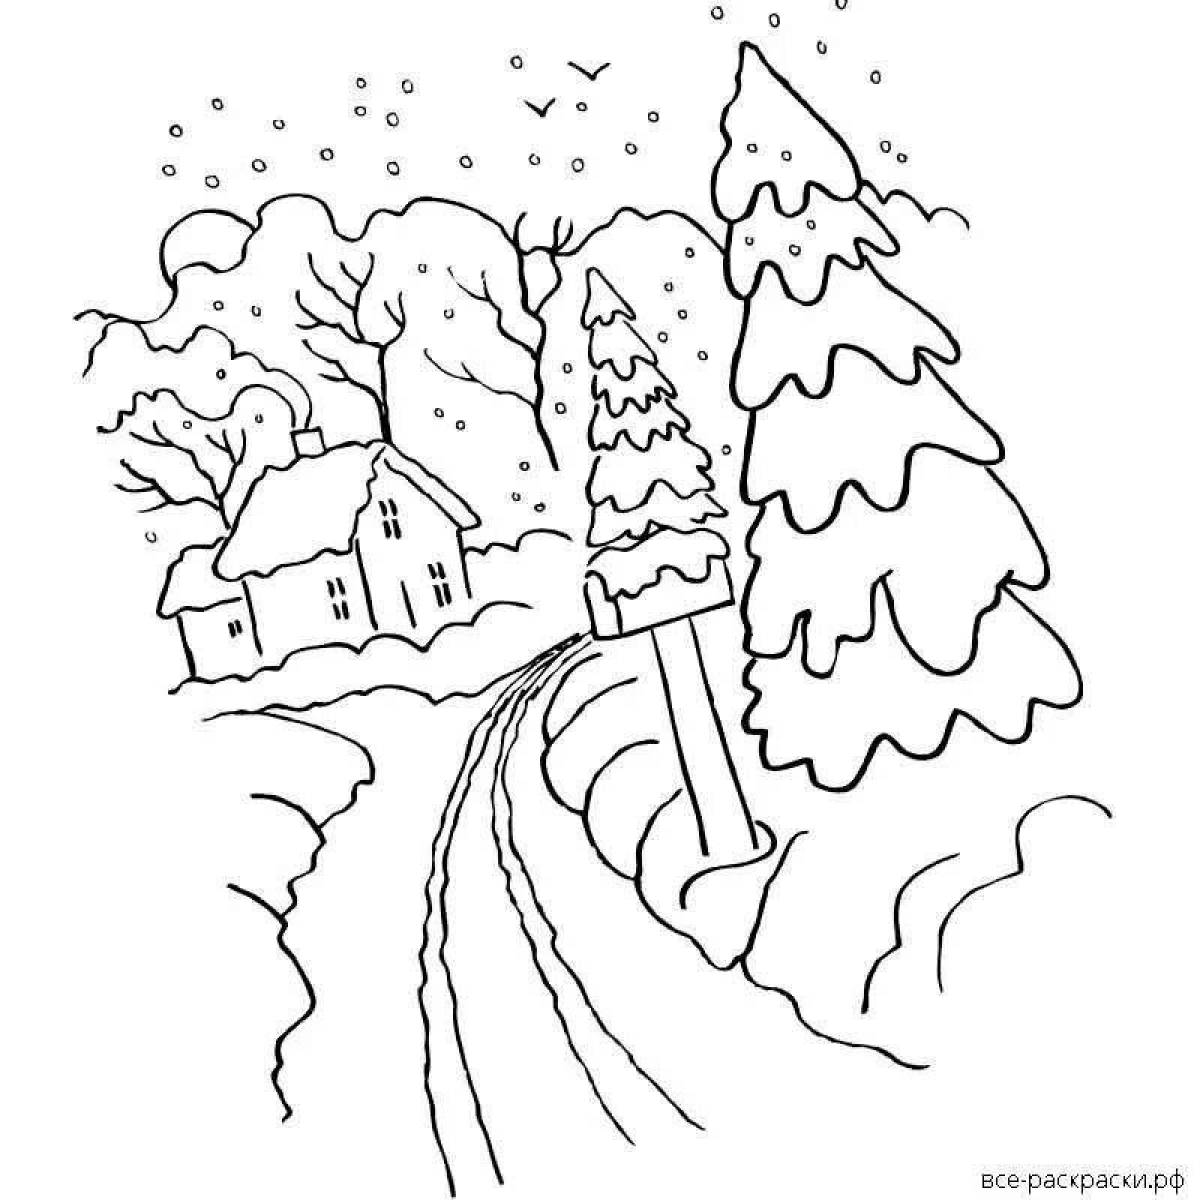 Coloring book dreamy winter forest for 4-5 year olds